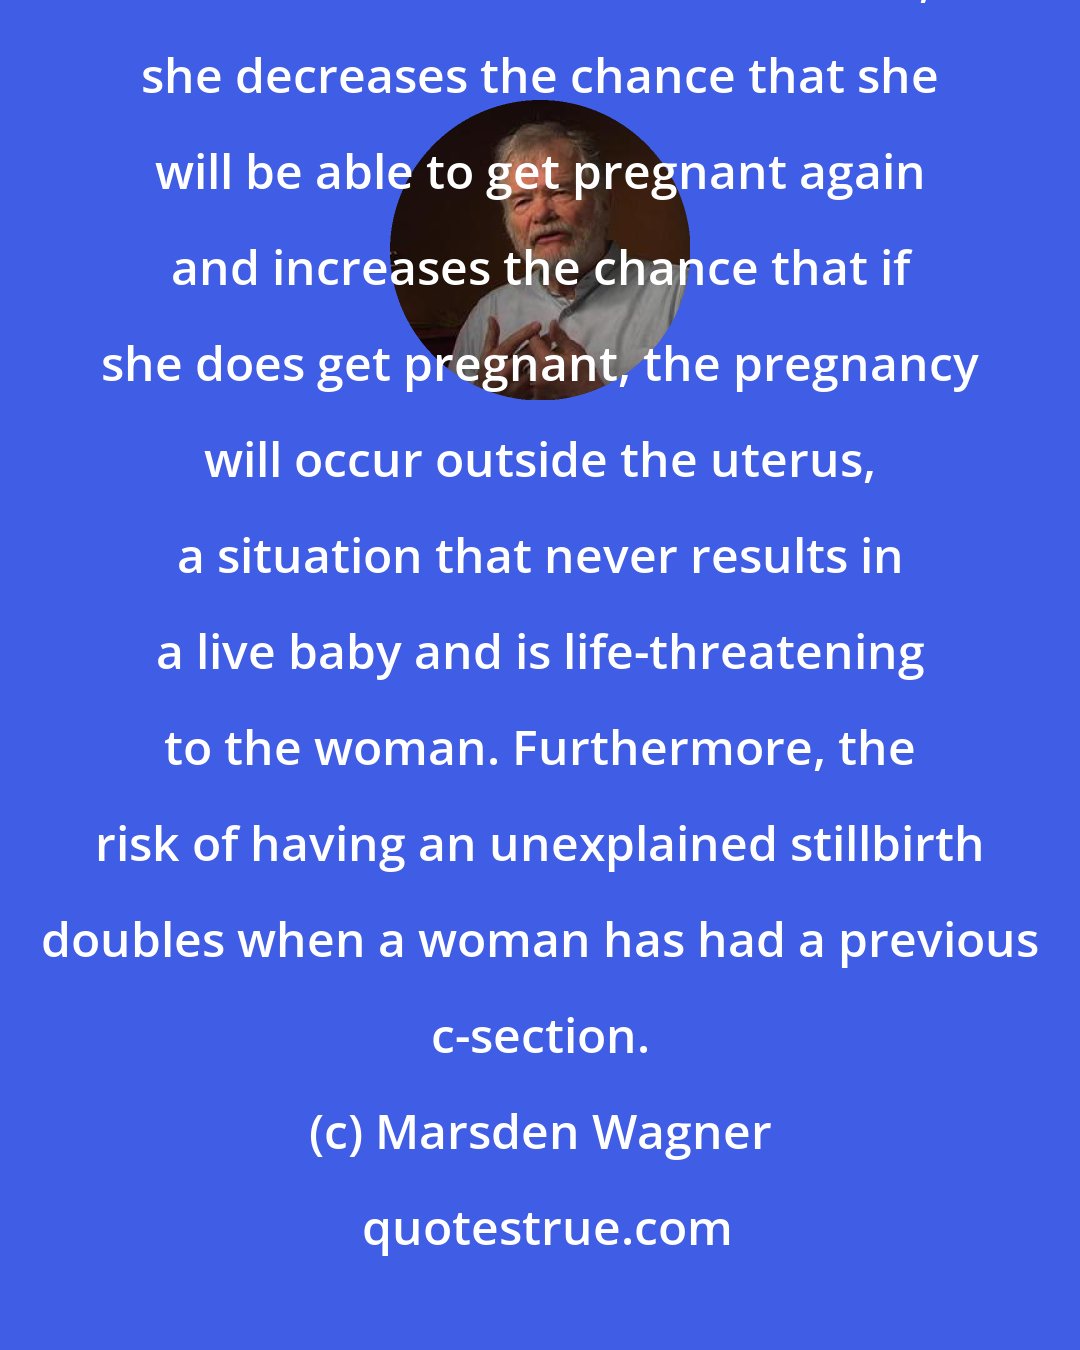 Marsden Wagner: Beyond the immediate risks to her health and the health of her baby, when a woman chooses c-section, she decreases the chance that she will be able to get pregnant again and increases the chance that if she does get pregnant, the pregnancy will occur outside the uterus, a situation that never results in a live baby and is life-threatening to the woman. Furthermore, the risk of having an unexplained stillbirth doubles when a woman has had a previous c-section.